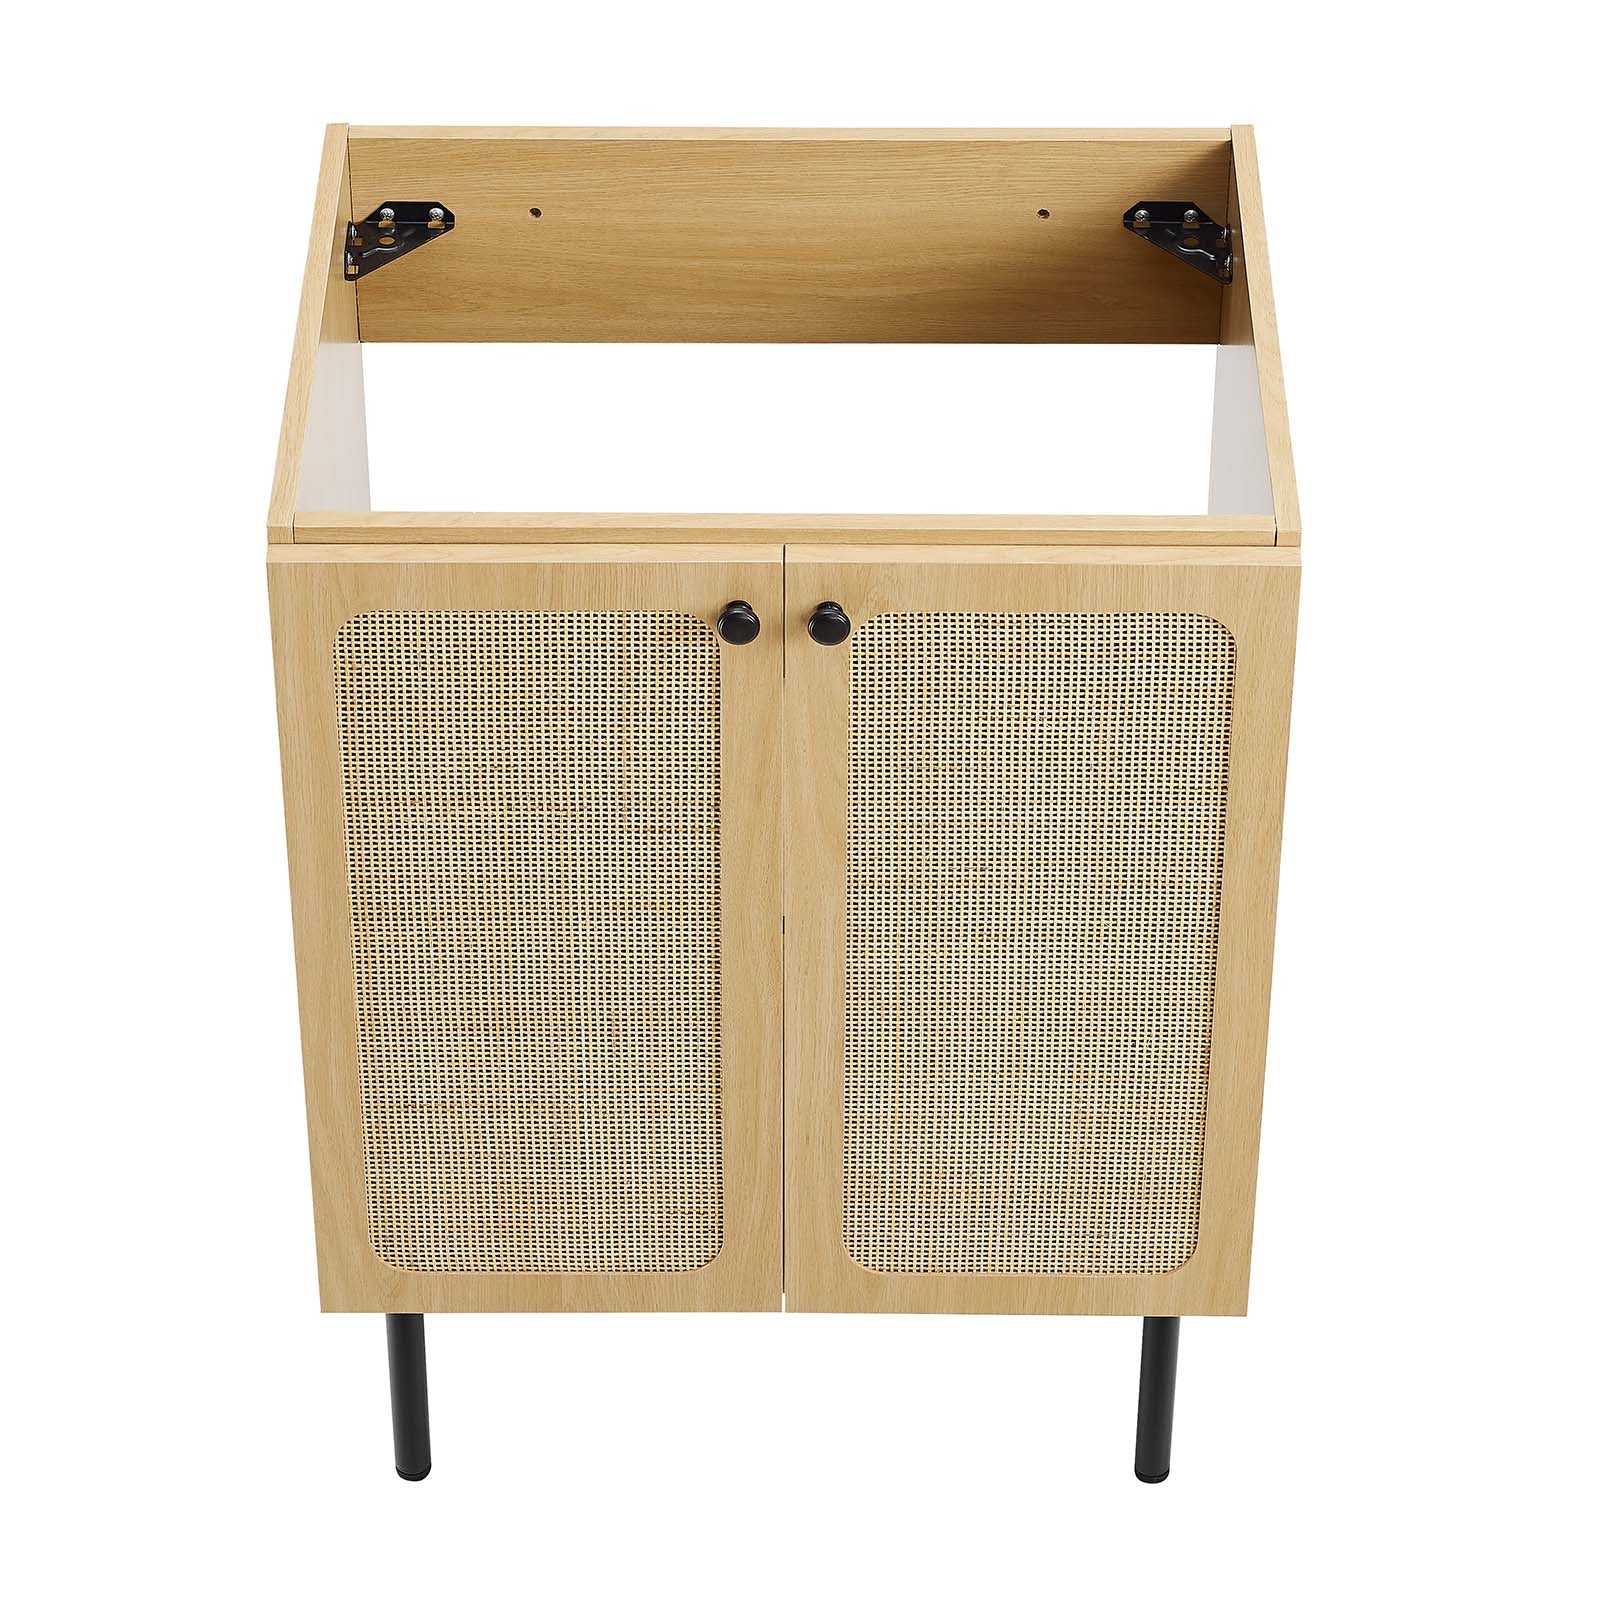 Chaucer 24" Bathroom Vanity Cabinet (Sink Basin Not Included) - East Shore Modern Home Furnishings